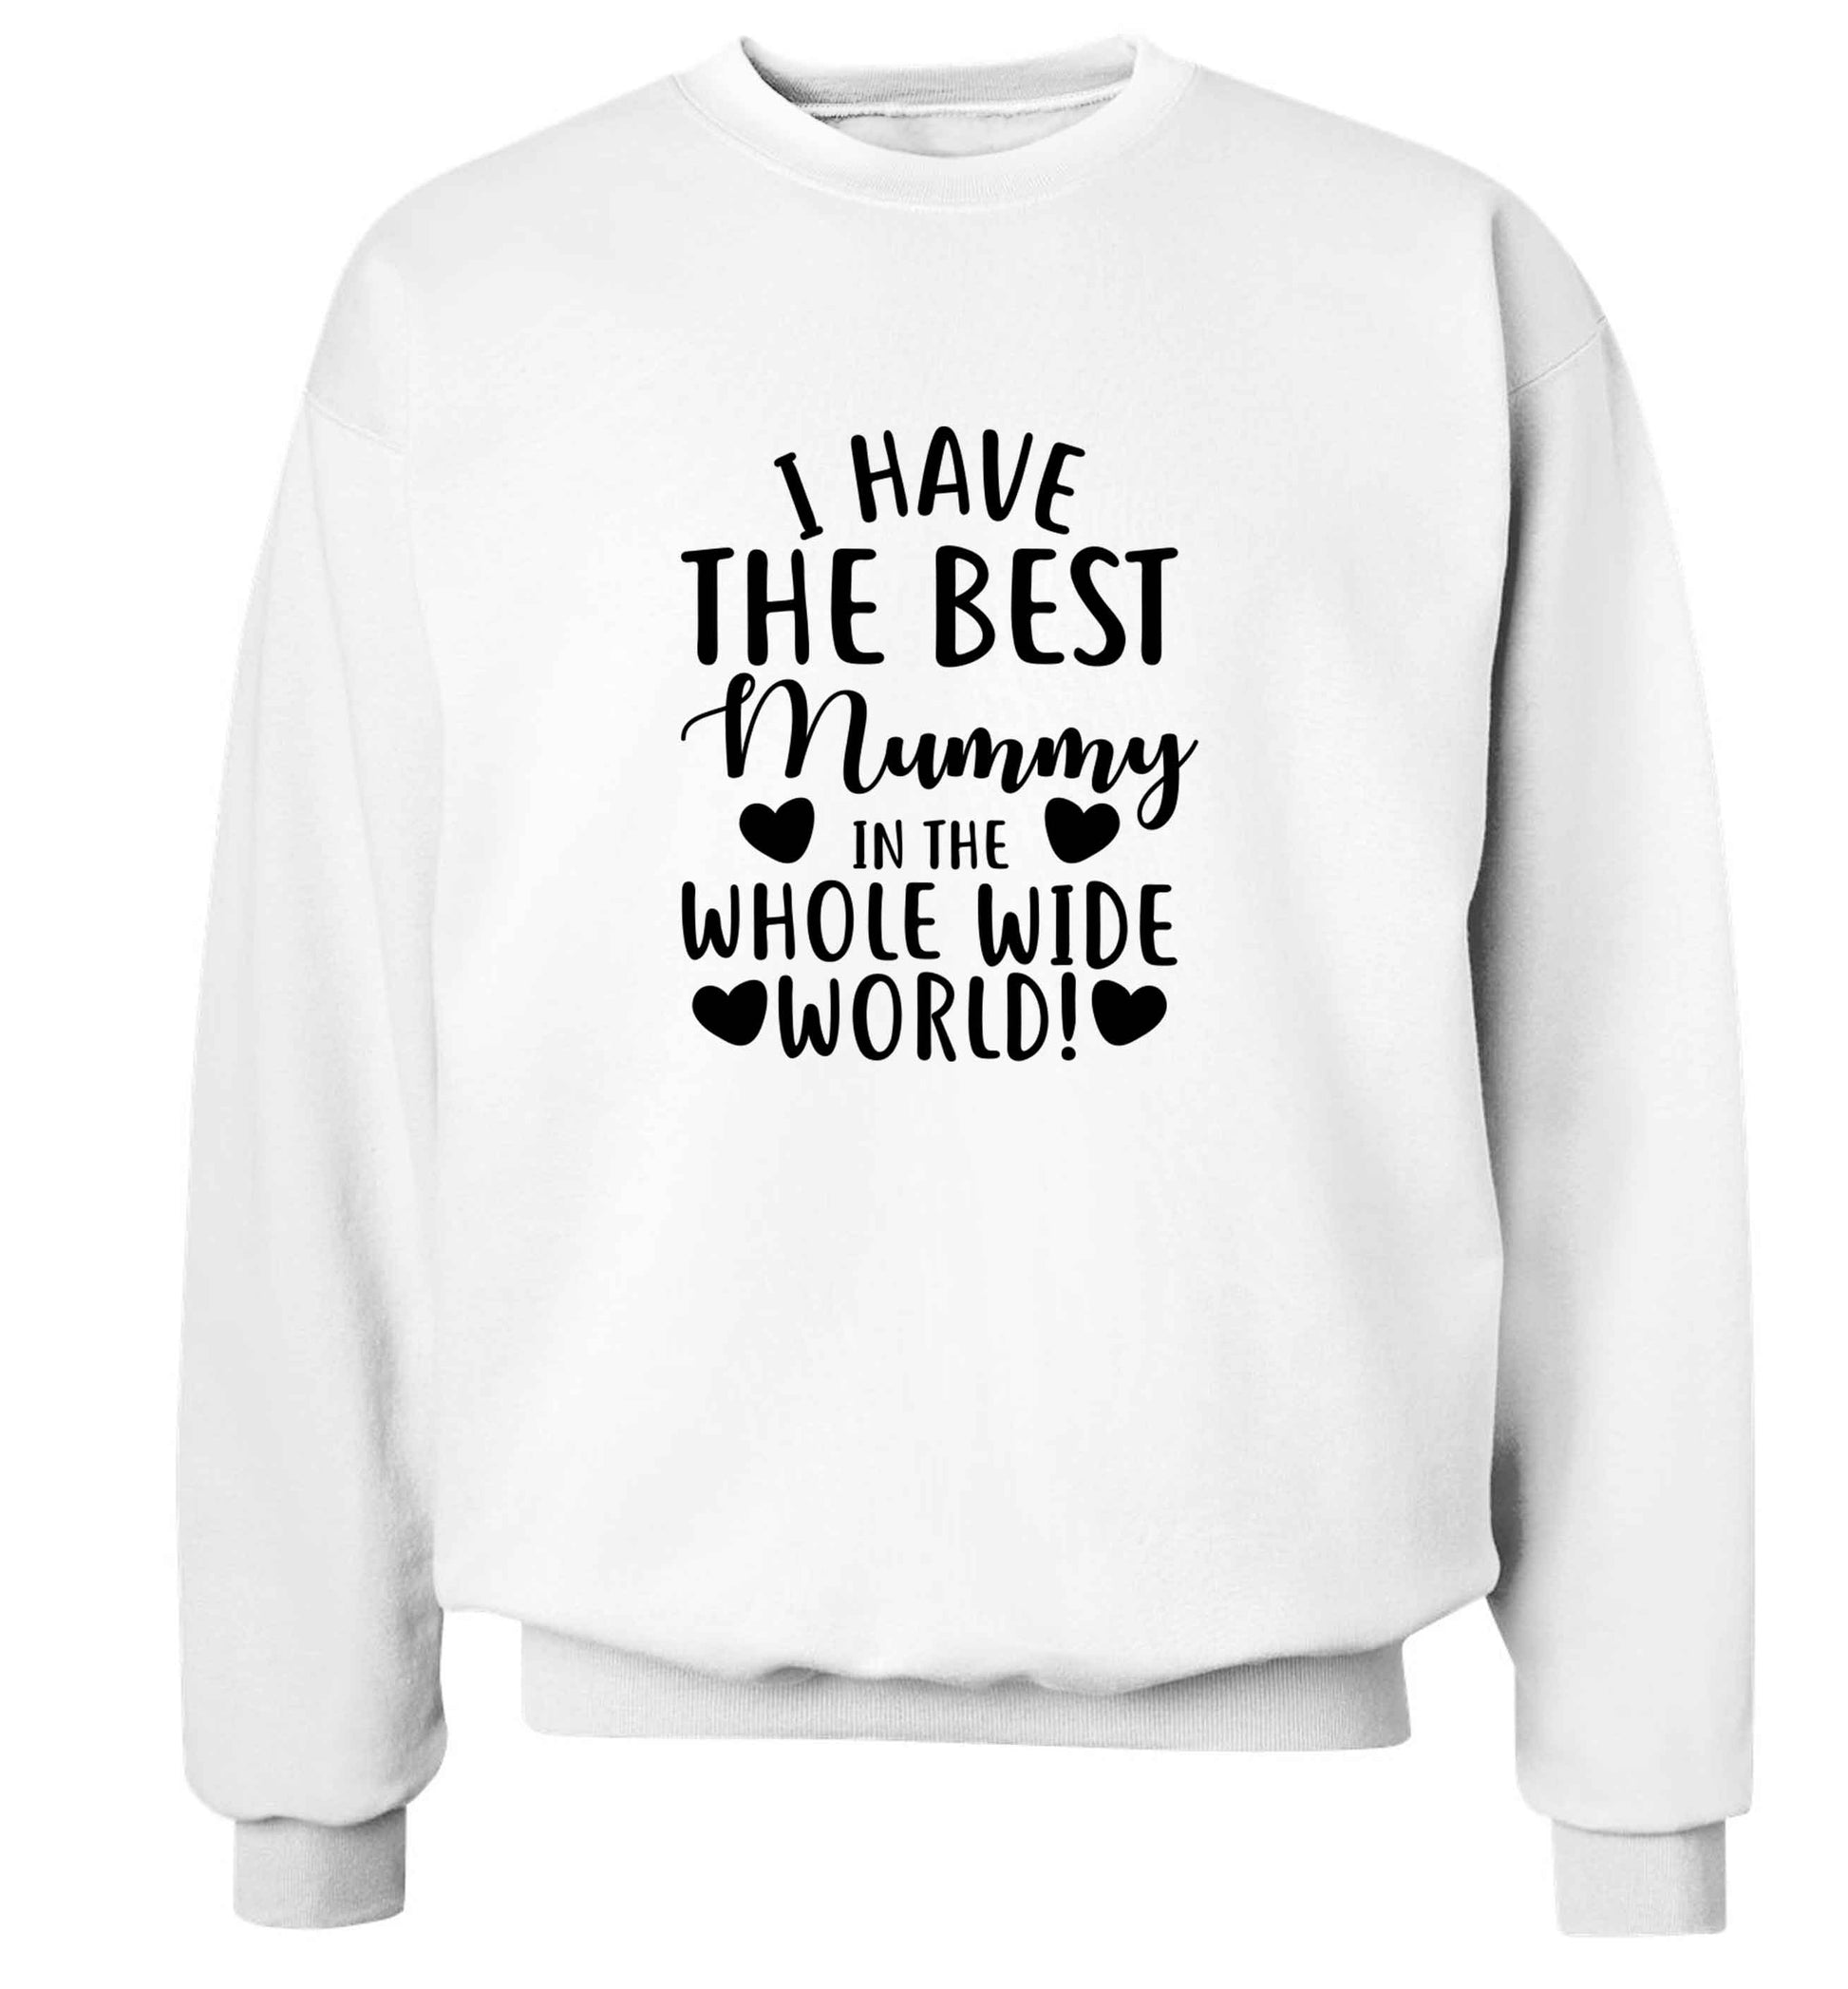 I have the best mummy in the whole wide world adult's unisex white sweater 2XL